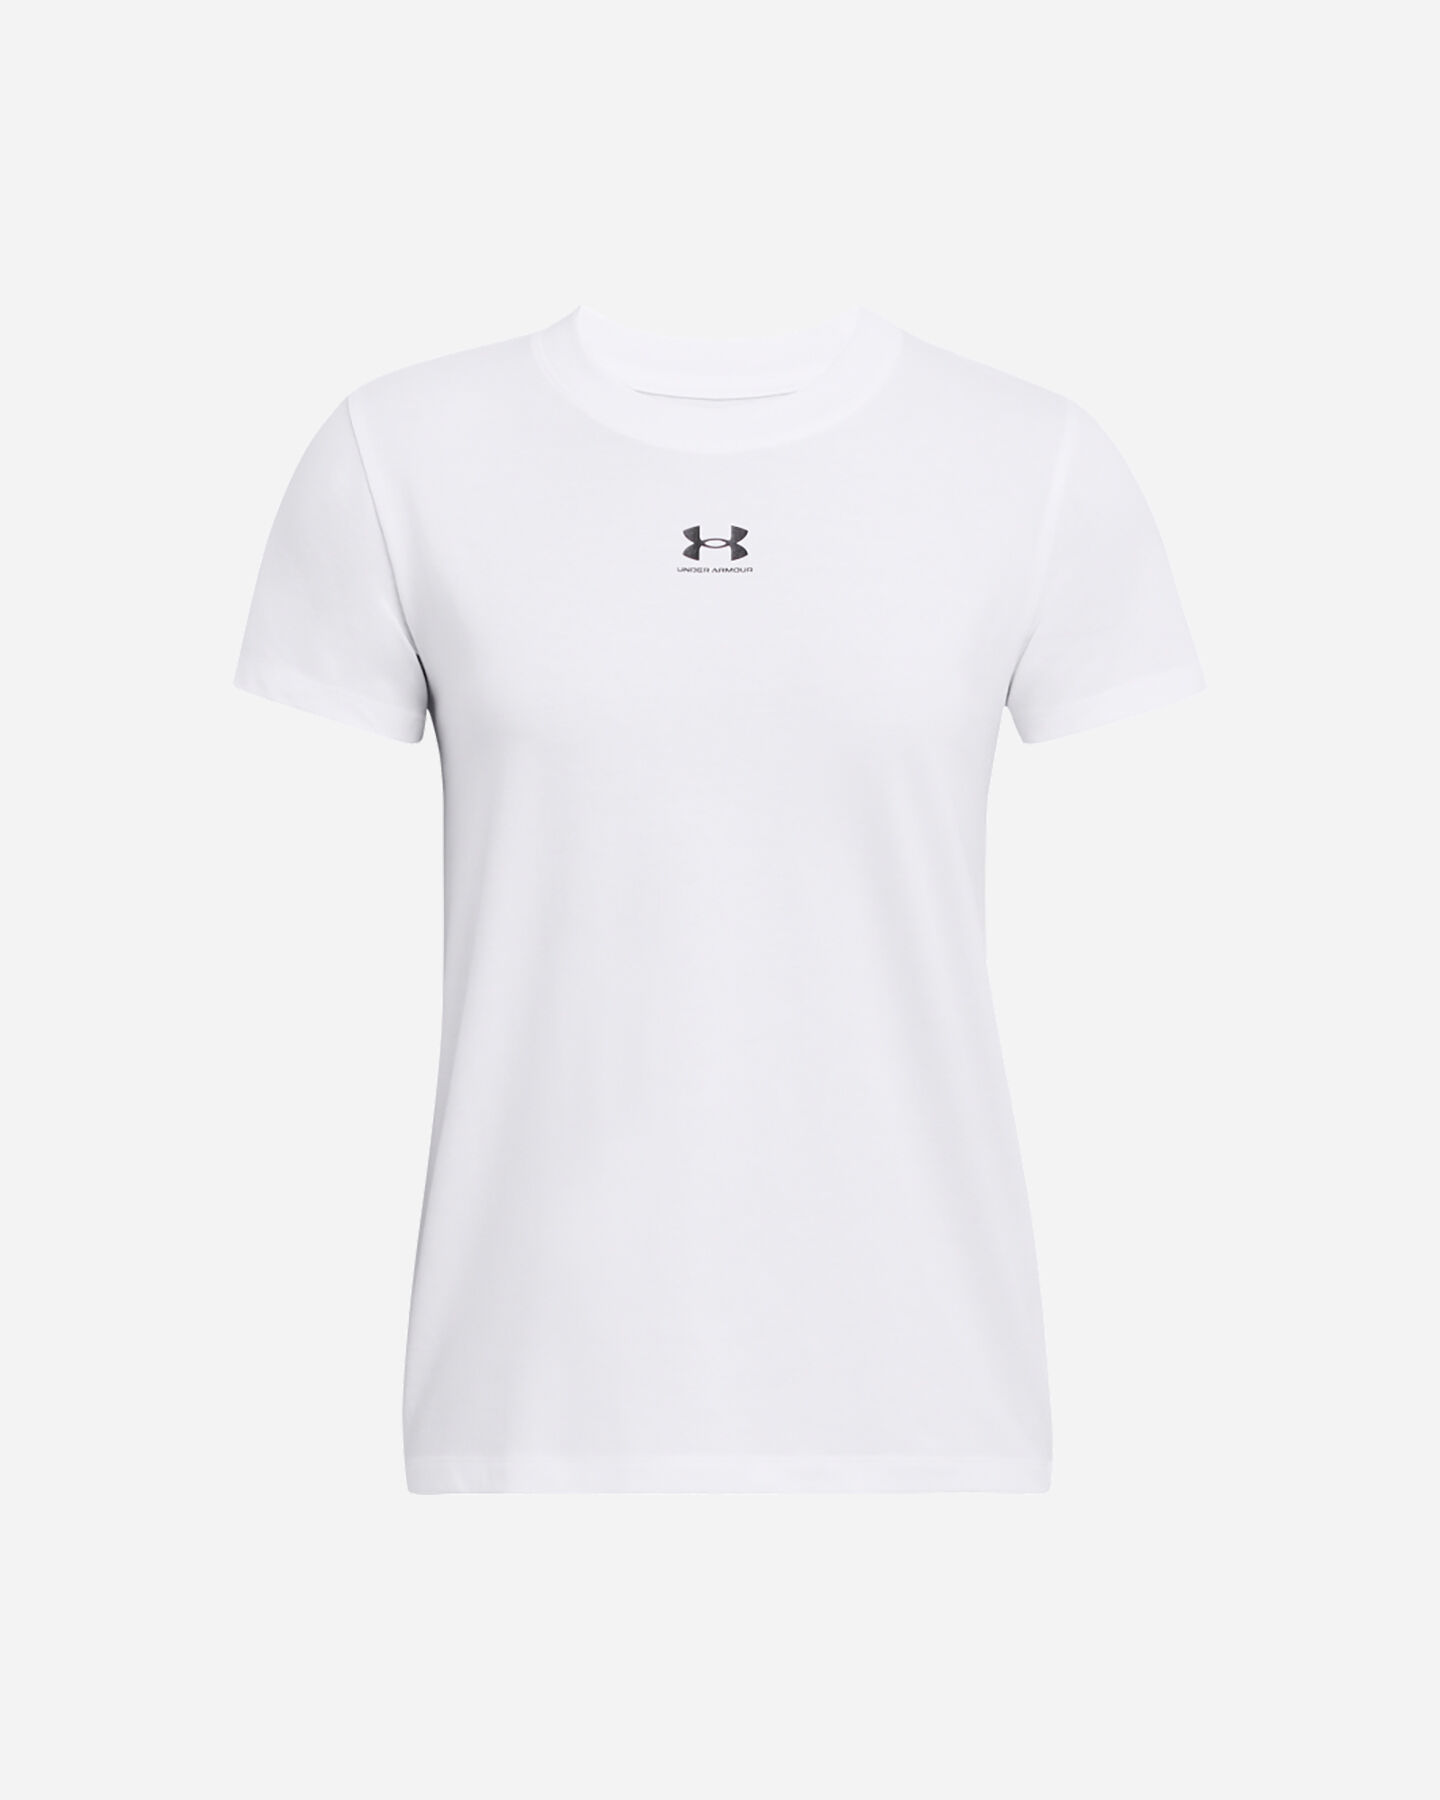  T-Shirt UNDER ARMOUR CAMPUS CORE W S5642020|0100|XS scatto 0